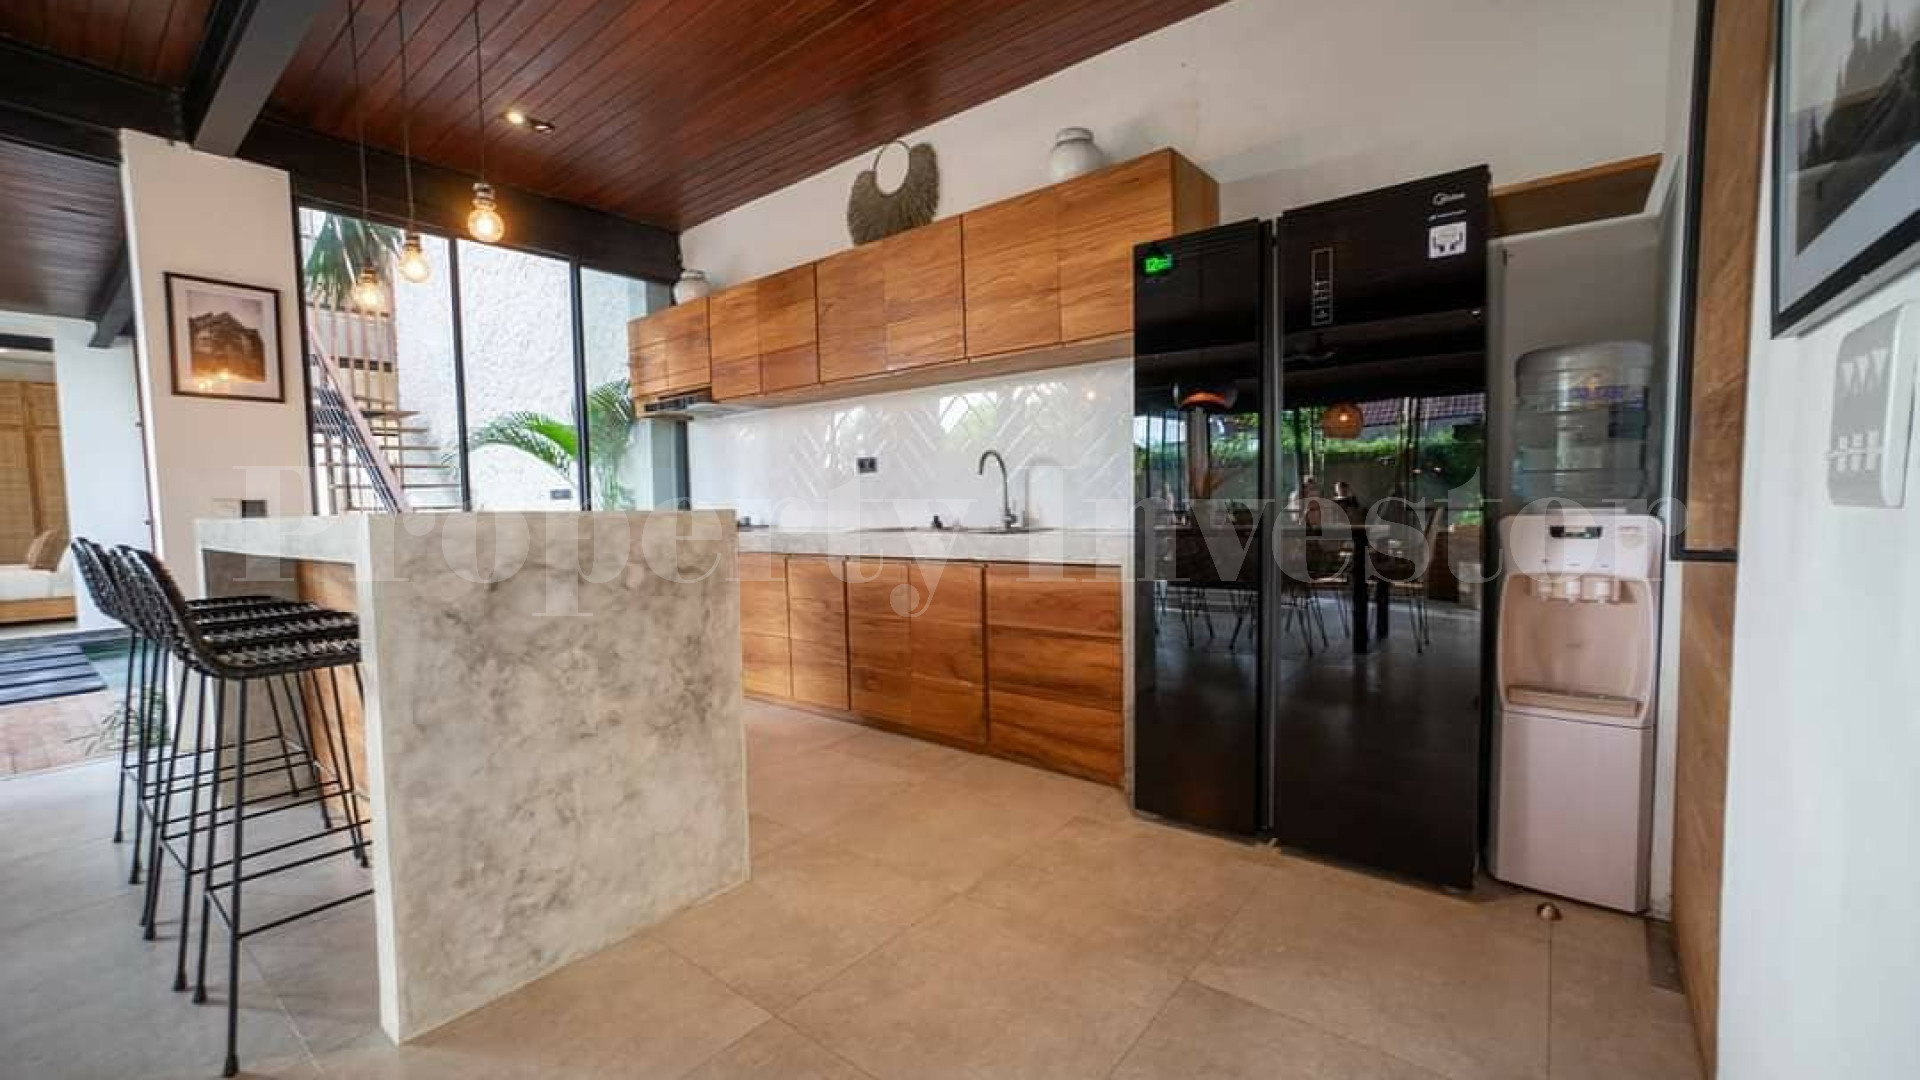 Stunning 5 Bedroom Contemporary Villa with Commercial Space for Sale in Berawa, Canggu, Bali